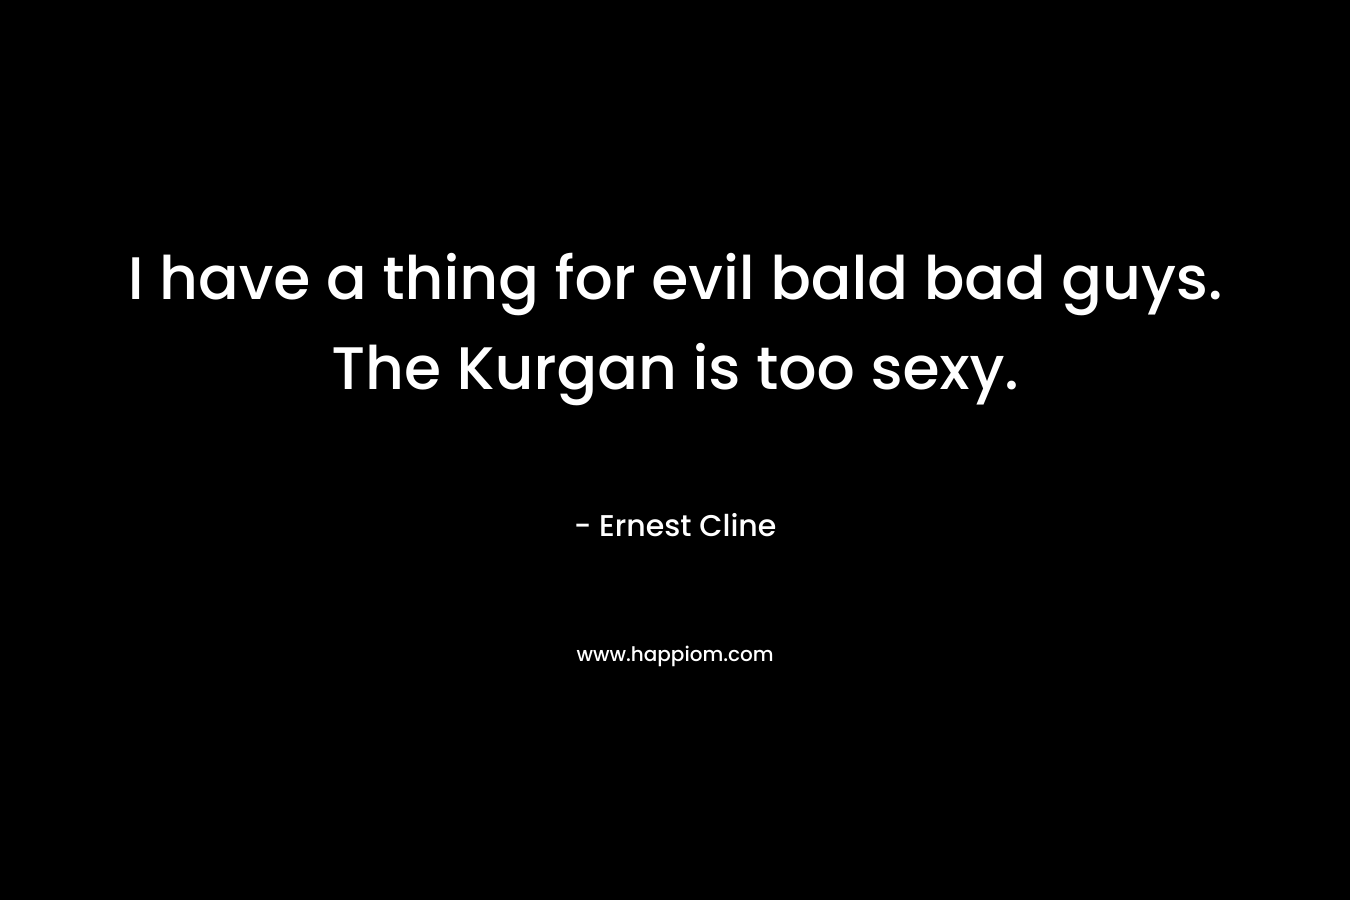 I have a thing for evil bald bad guys. The Kurgan is too sexy.